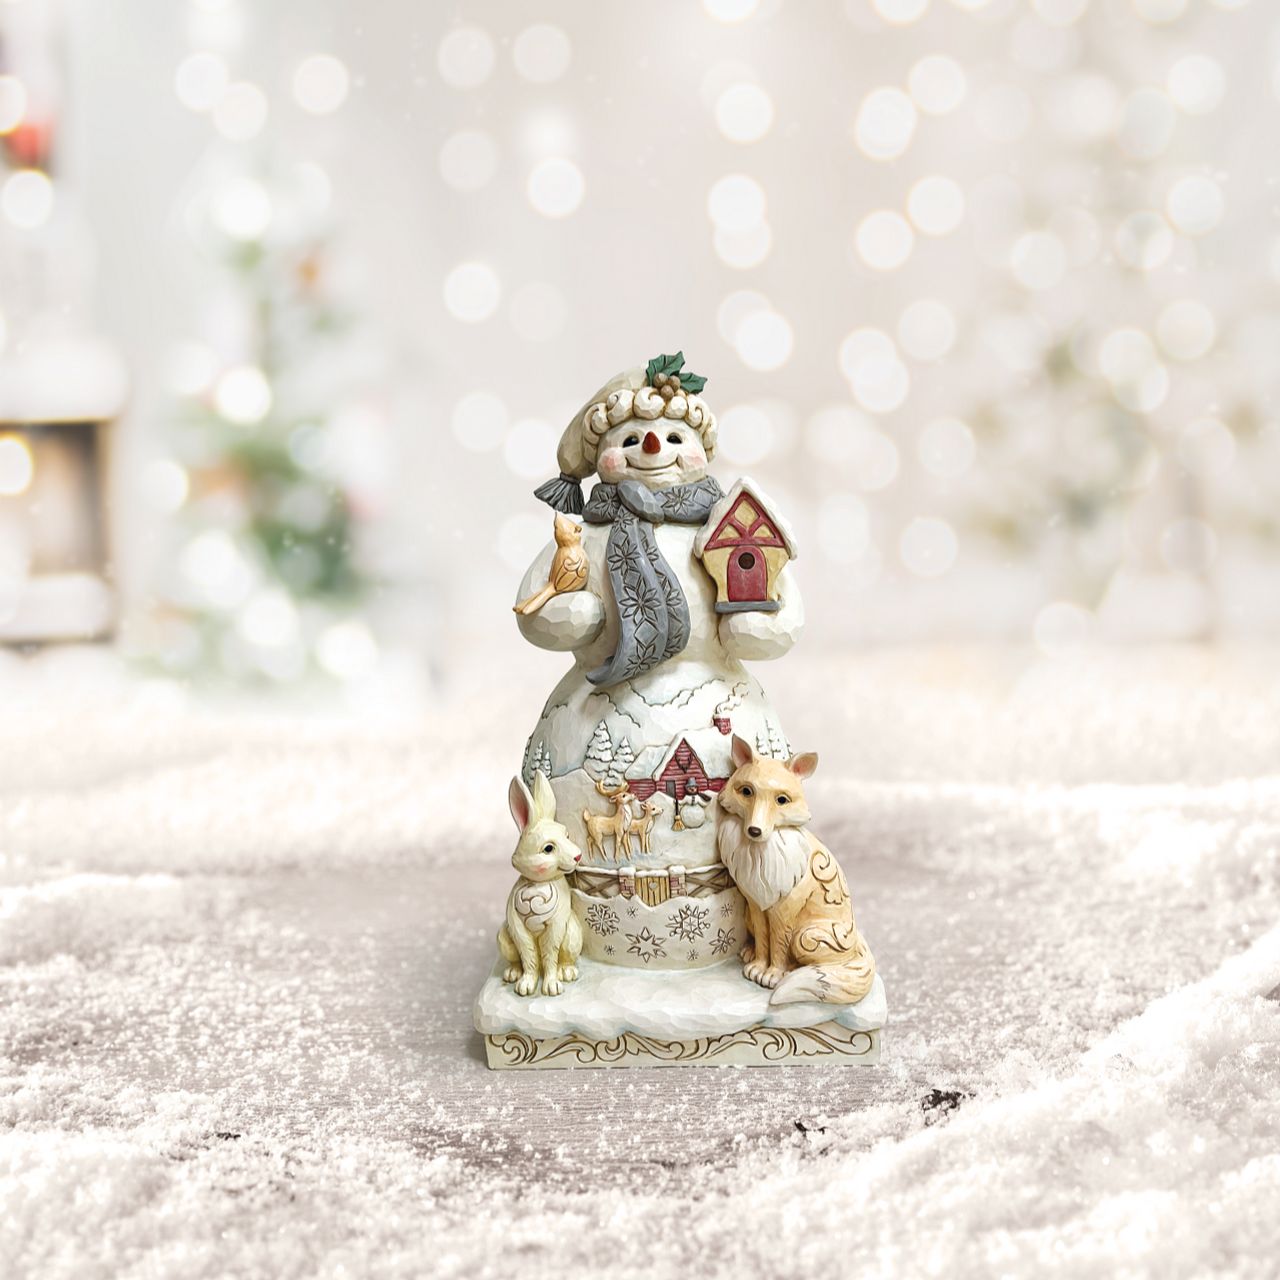 Jim Shore White Woodland Collection Snowman and Animals Statue  The White Woodland Collection showcases Intricate Jim Shore designs, with soft neutral colour palette suitable for many styles of home décor. This Statue size Snowman with woodland animals is the showstopper of this collection and would make the most delightful show stopping feature in any home.